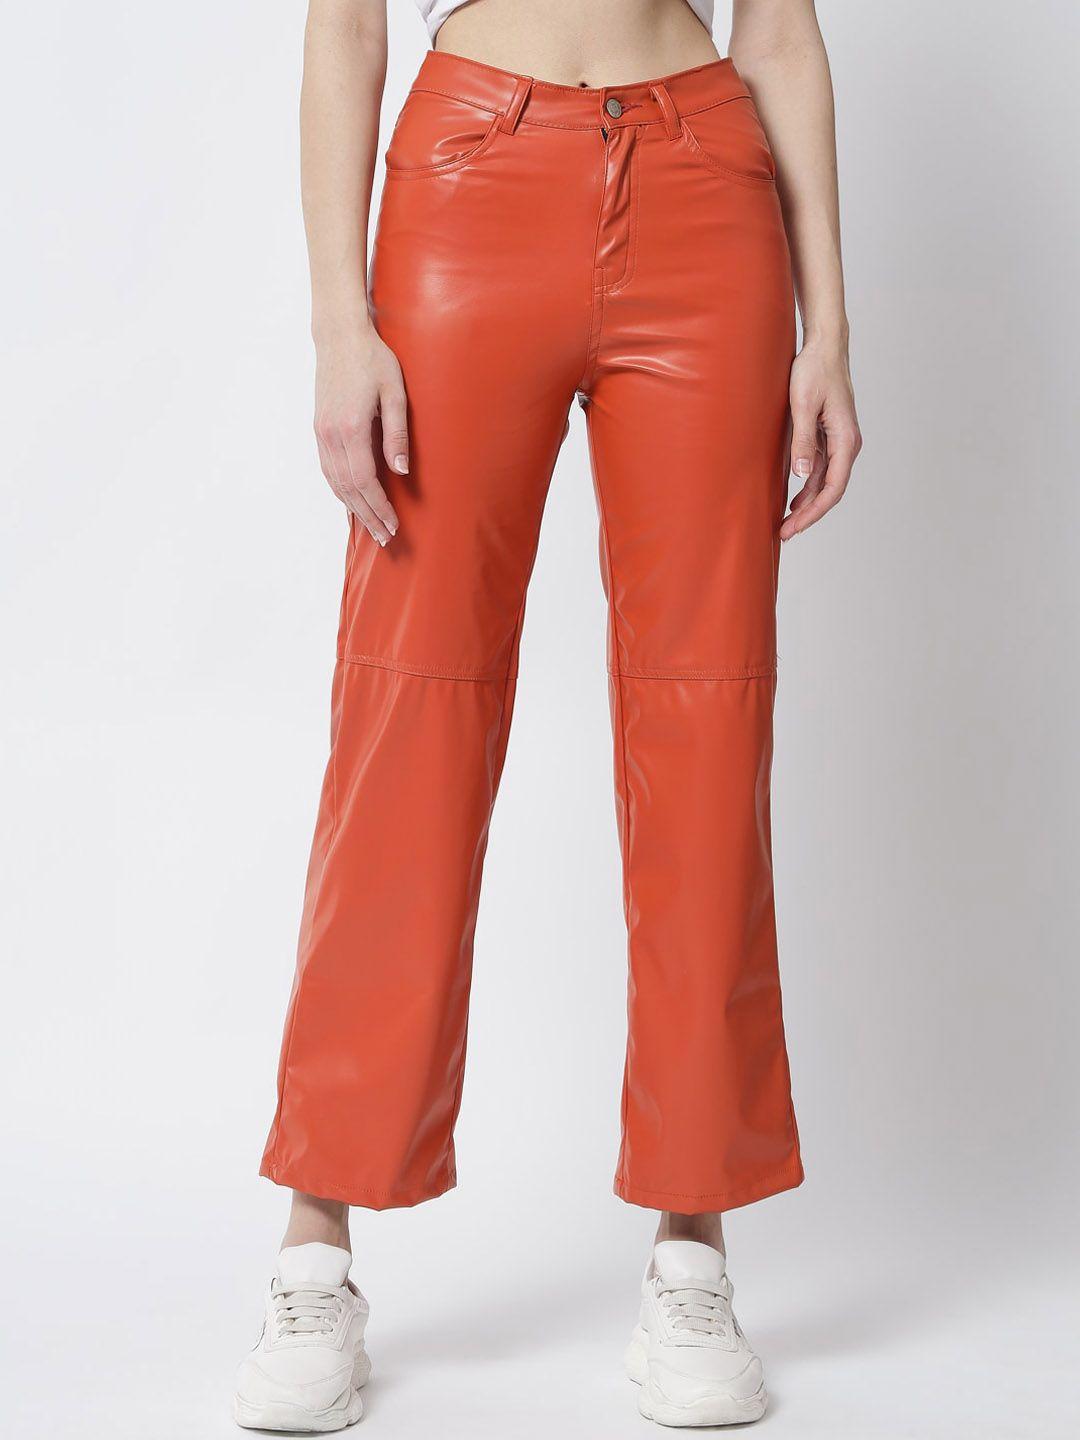 kotty-women-orange-relaxed-straight-fit-ankle-length-trousers